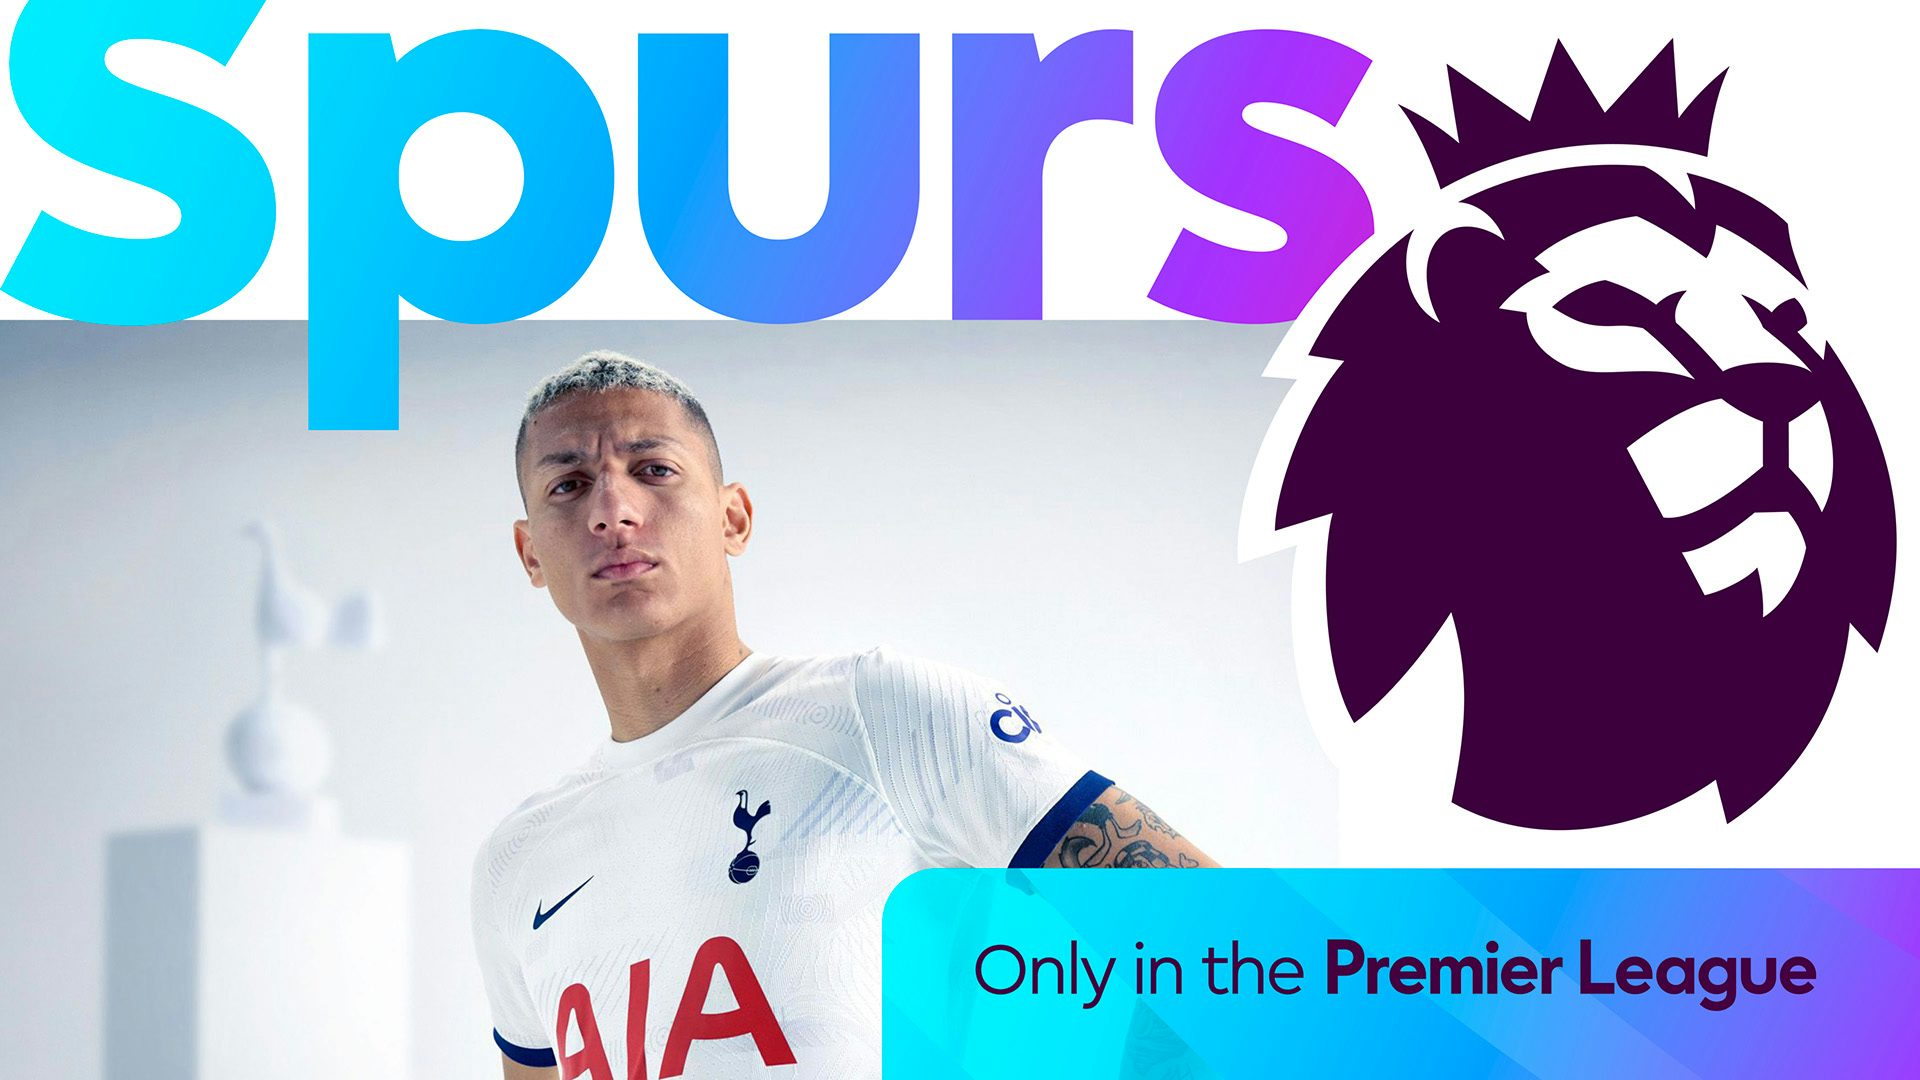 Graphic showing the Premier League brand refresh, as seen on a design headlined 'Spurs' in blue and purple gradient font, a photo of Richarlison, and the league's purple lion icon